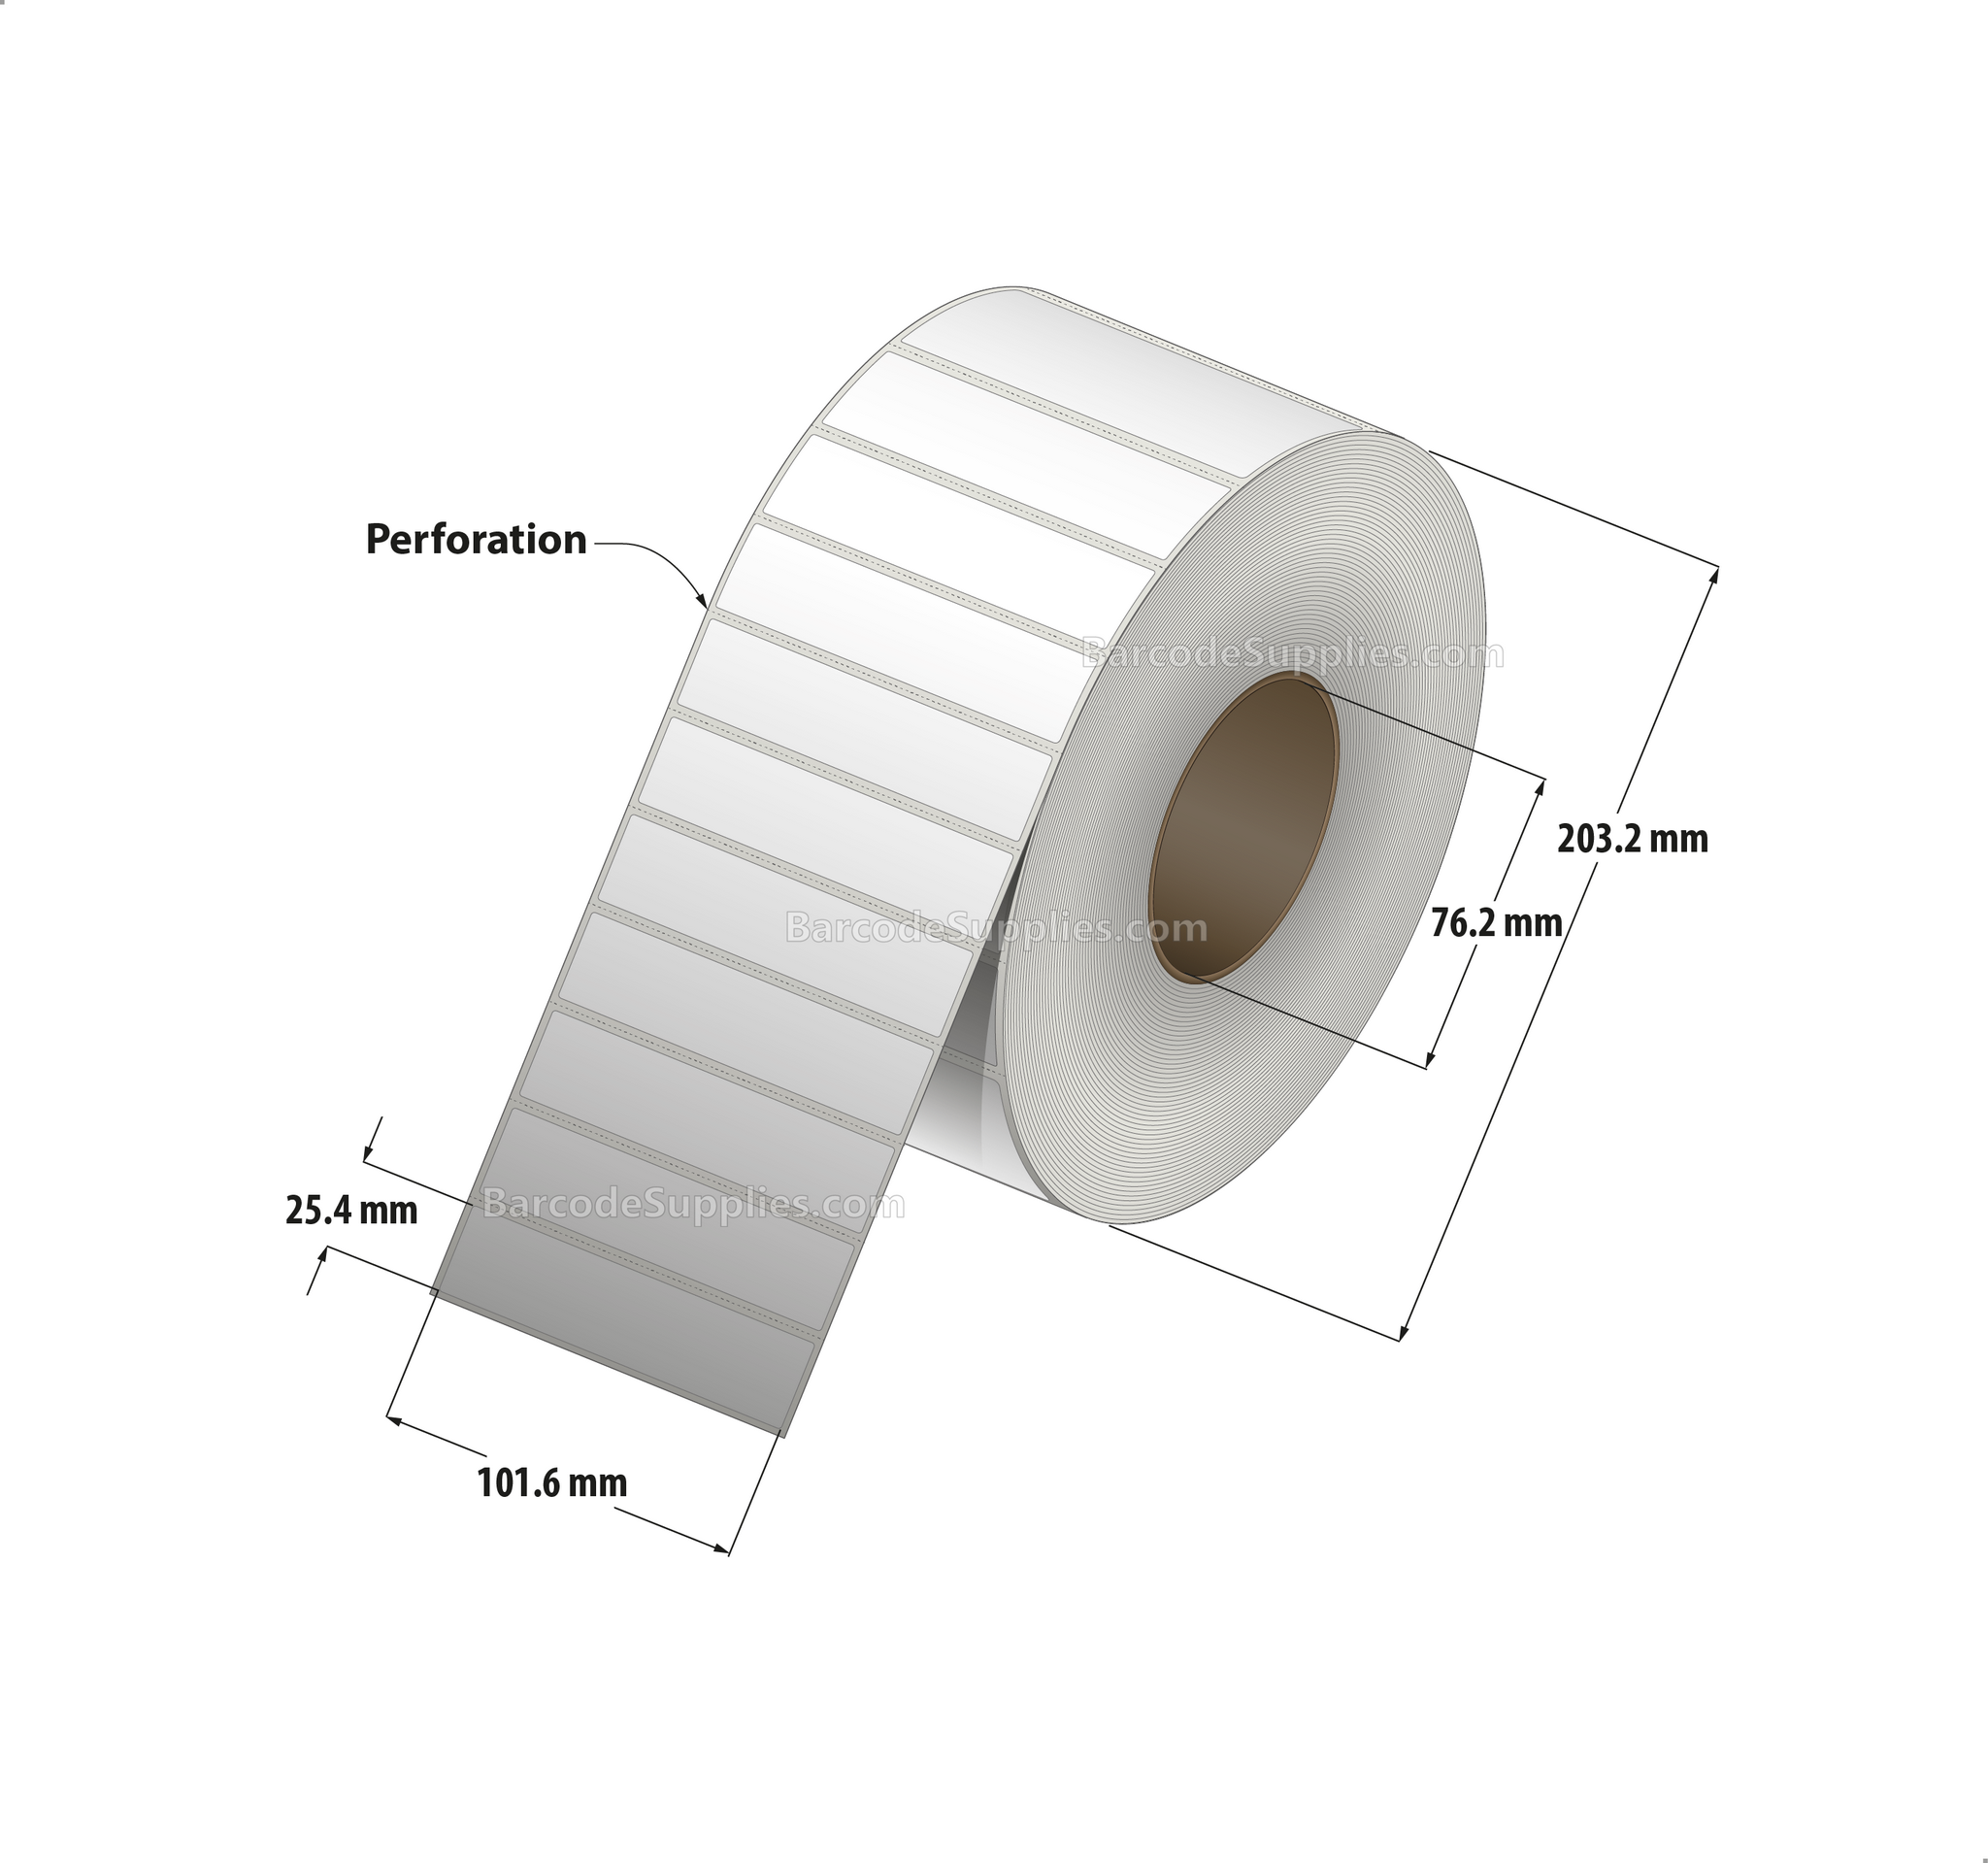 4 x 1 Thermal Transfer White Labels With Removable Adhesive - Perforated - 5500 Labels Per Roll - Carton Of 4 Rolls - 22000 Labels Total - MPN: RE-4-1-5500-3